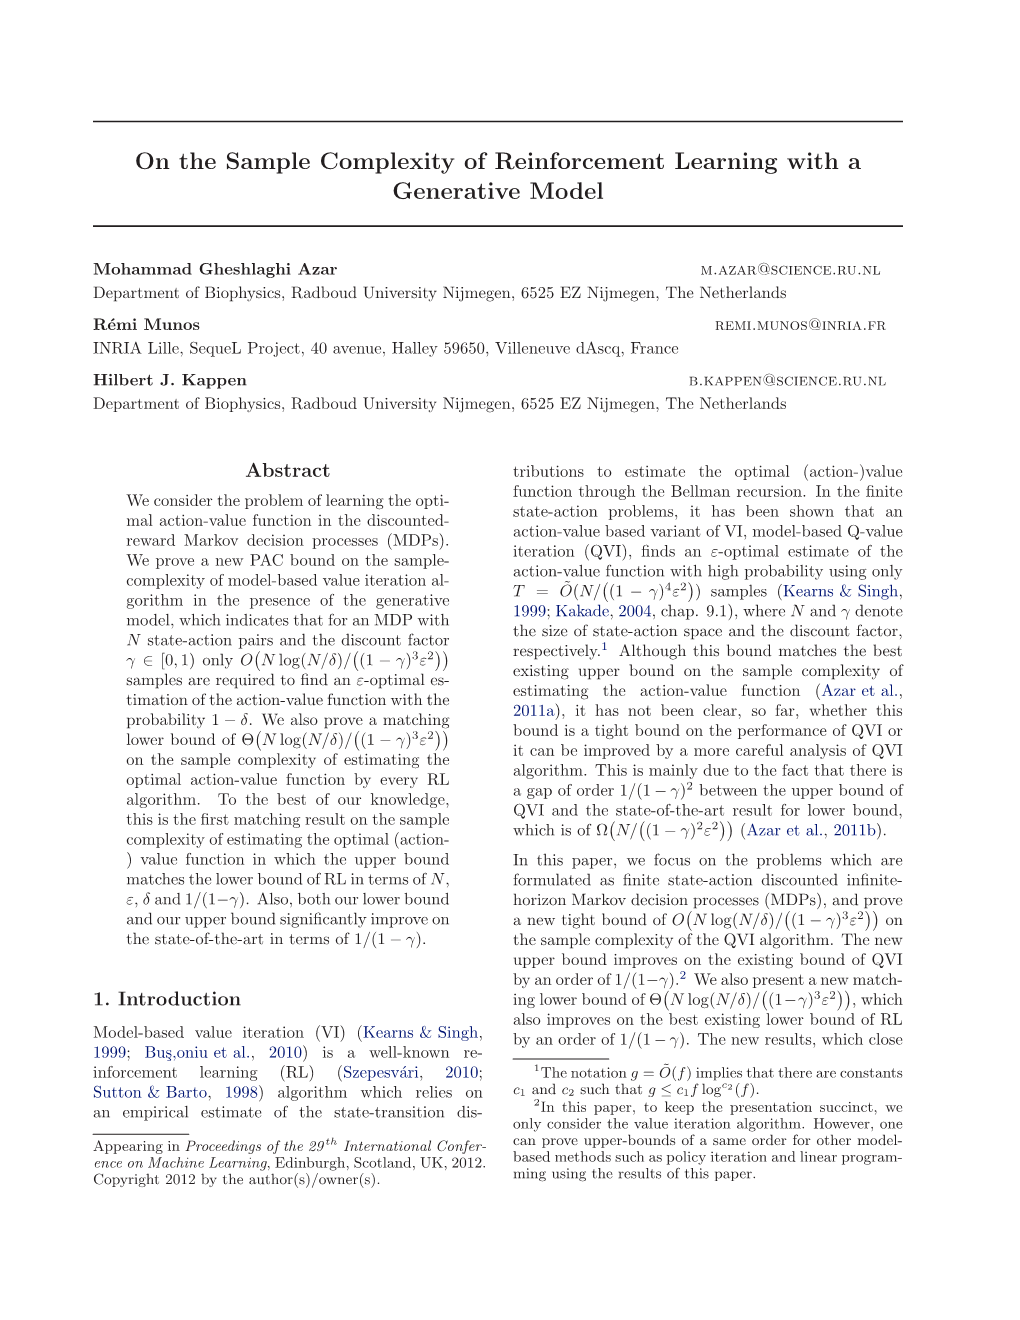 On the Sample Complexity of Reinforcement Learning with a Generative Model